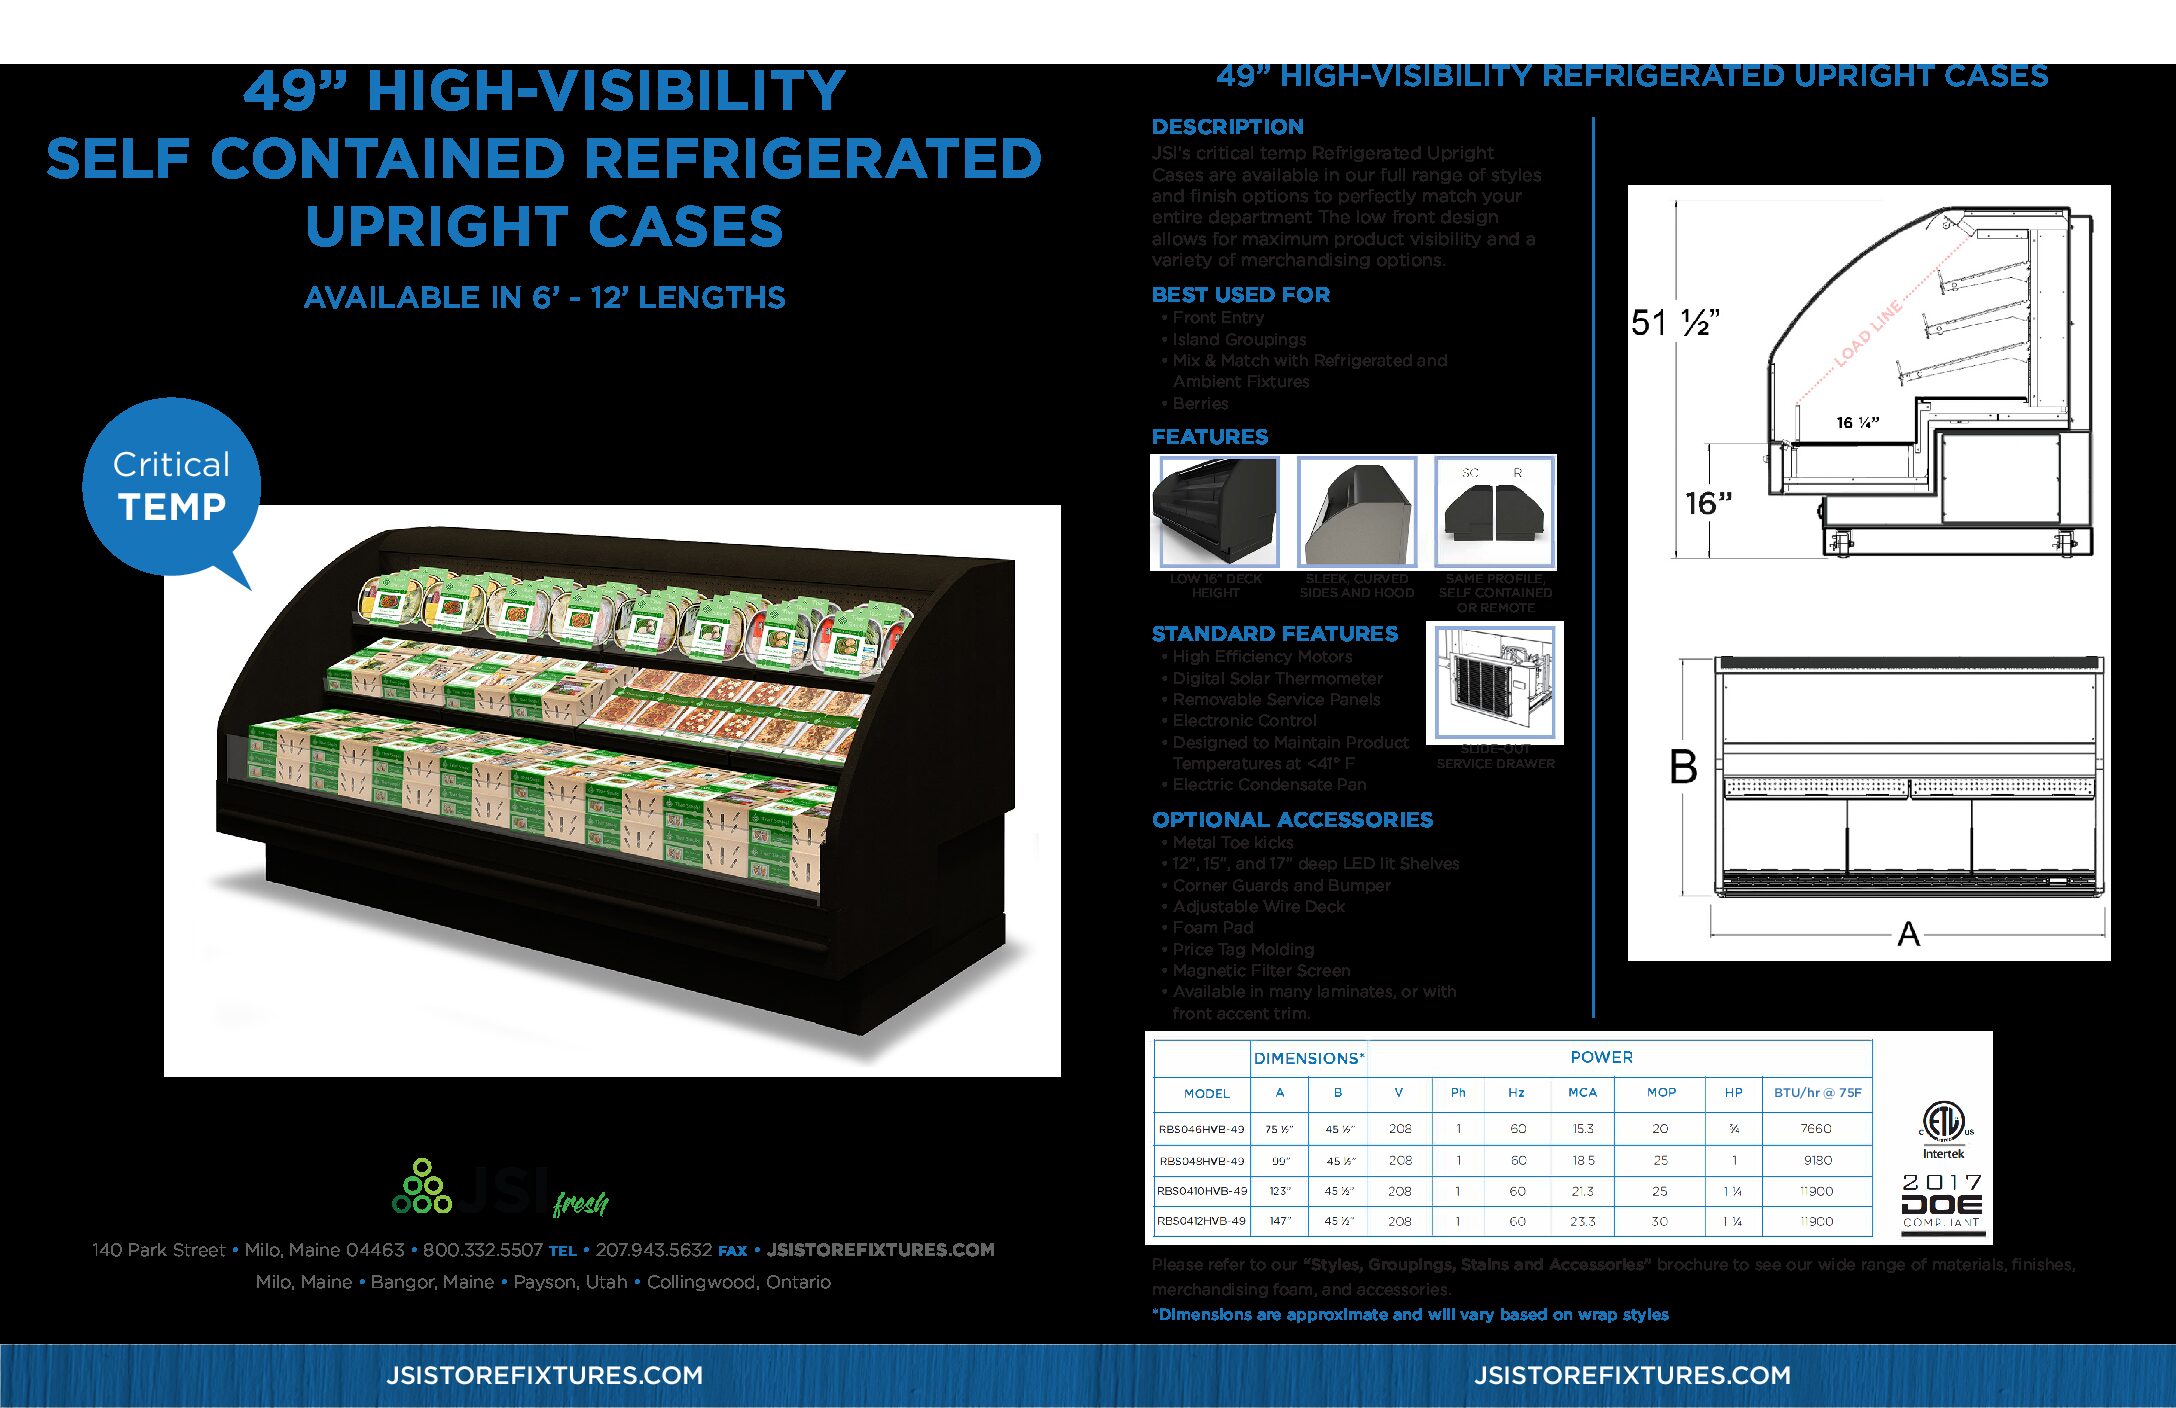 49” High-Visibility Self Contained Refrigerated Upright Case Spec Sheet (PDF)